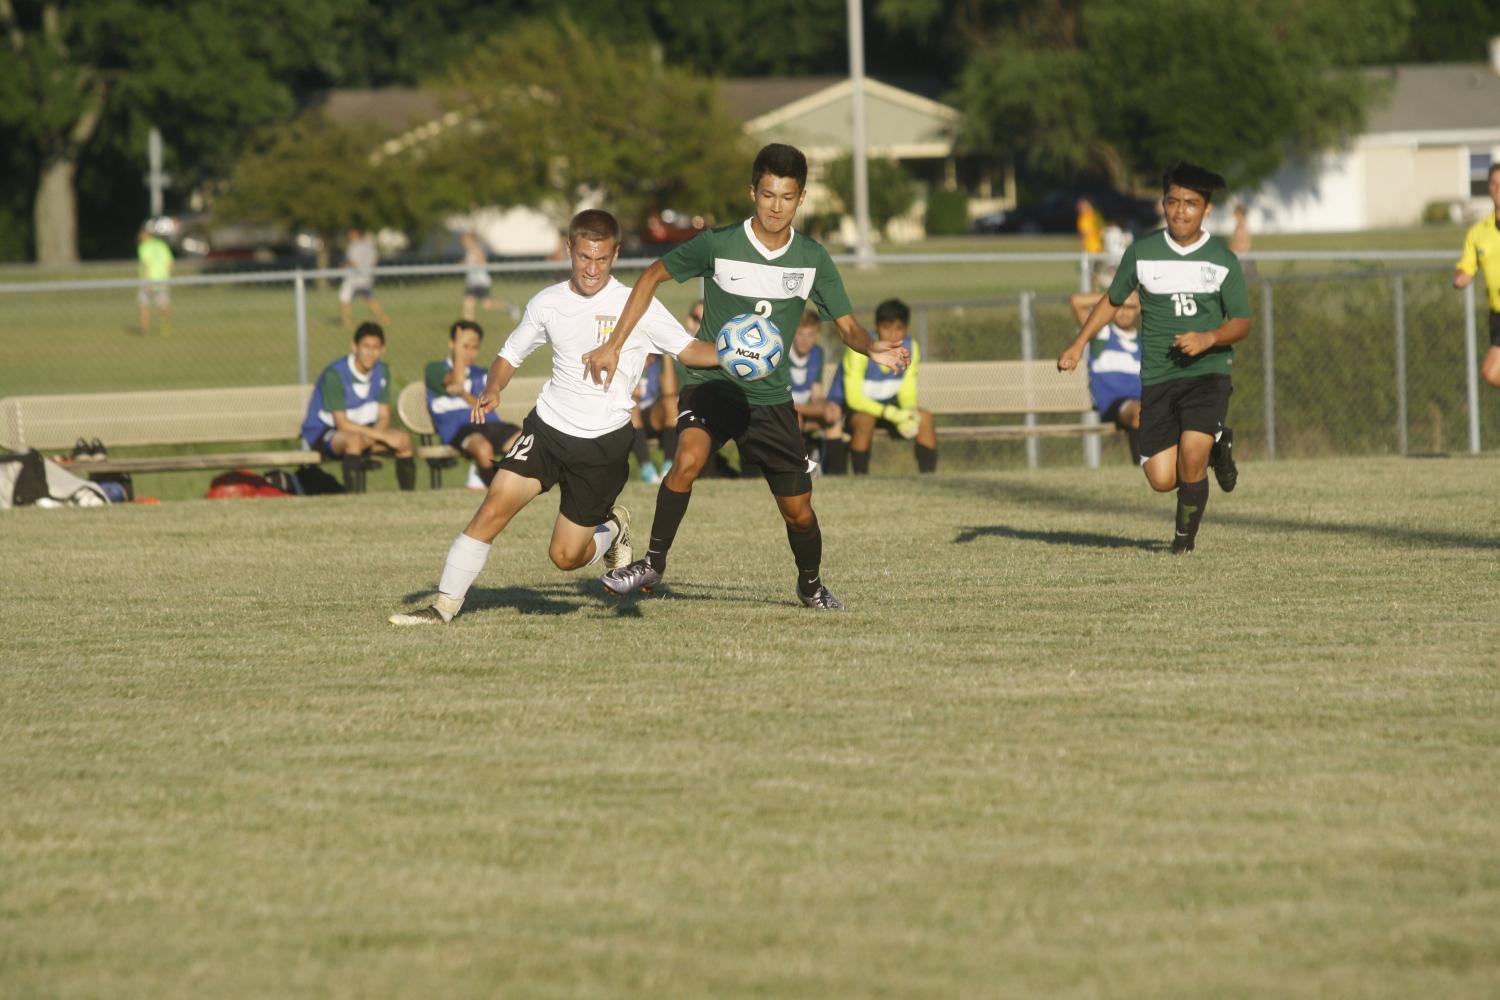 Boys soccer looks to build consistensy, offensive power: Season Preview